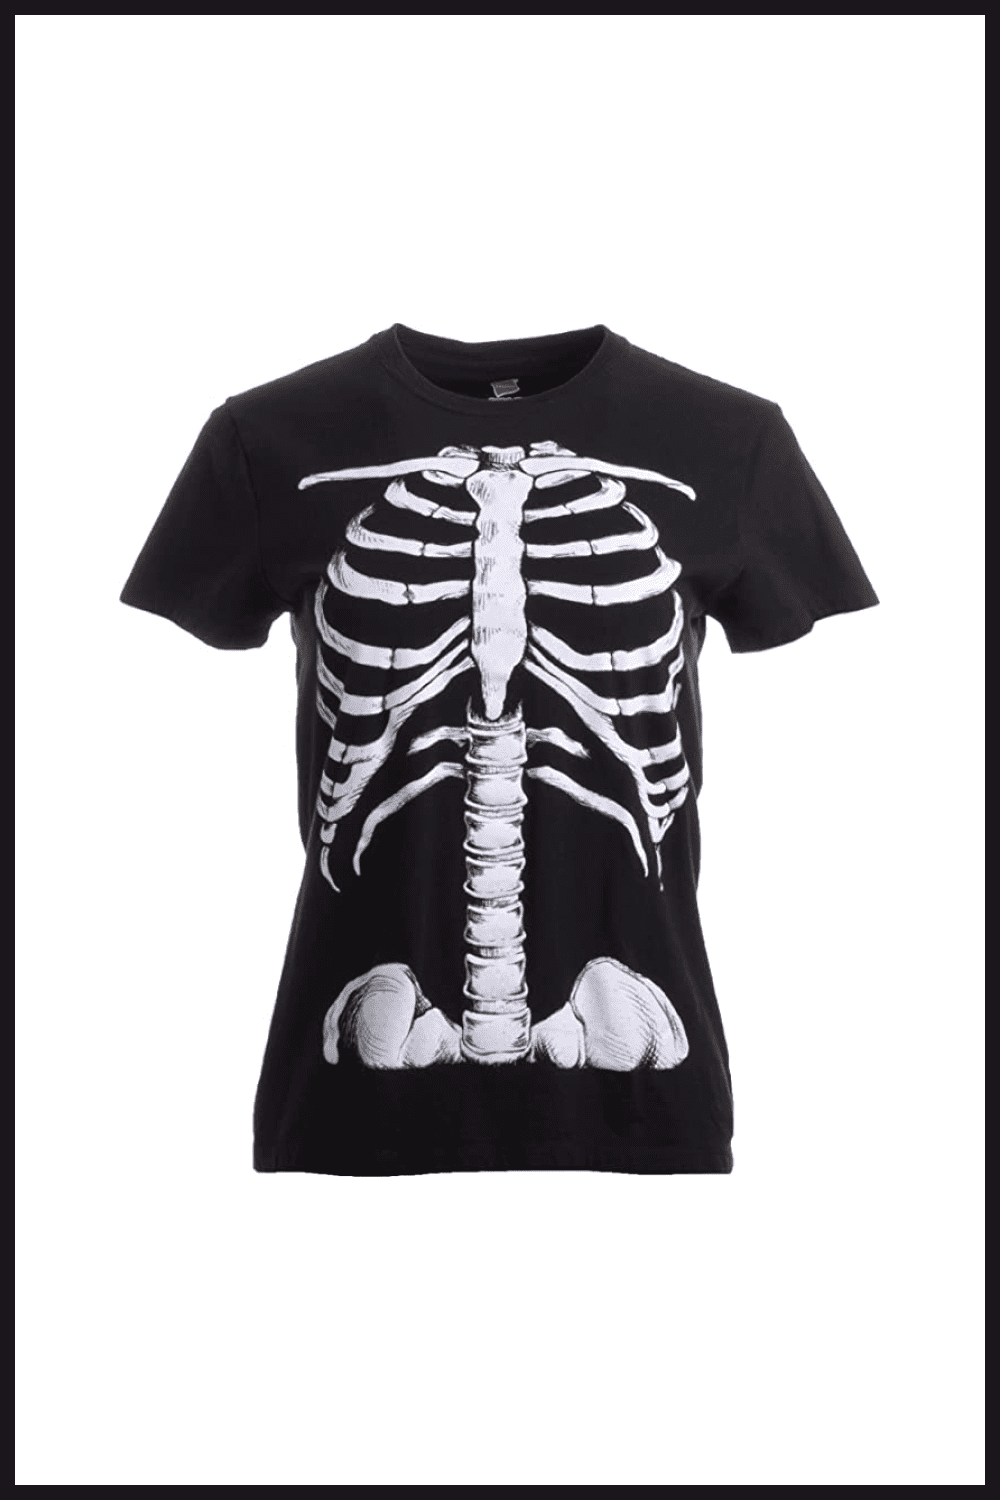 Black T-shirt with white chest, spine and pelvis.